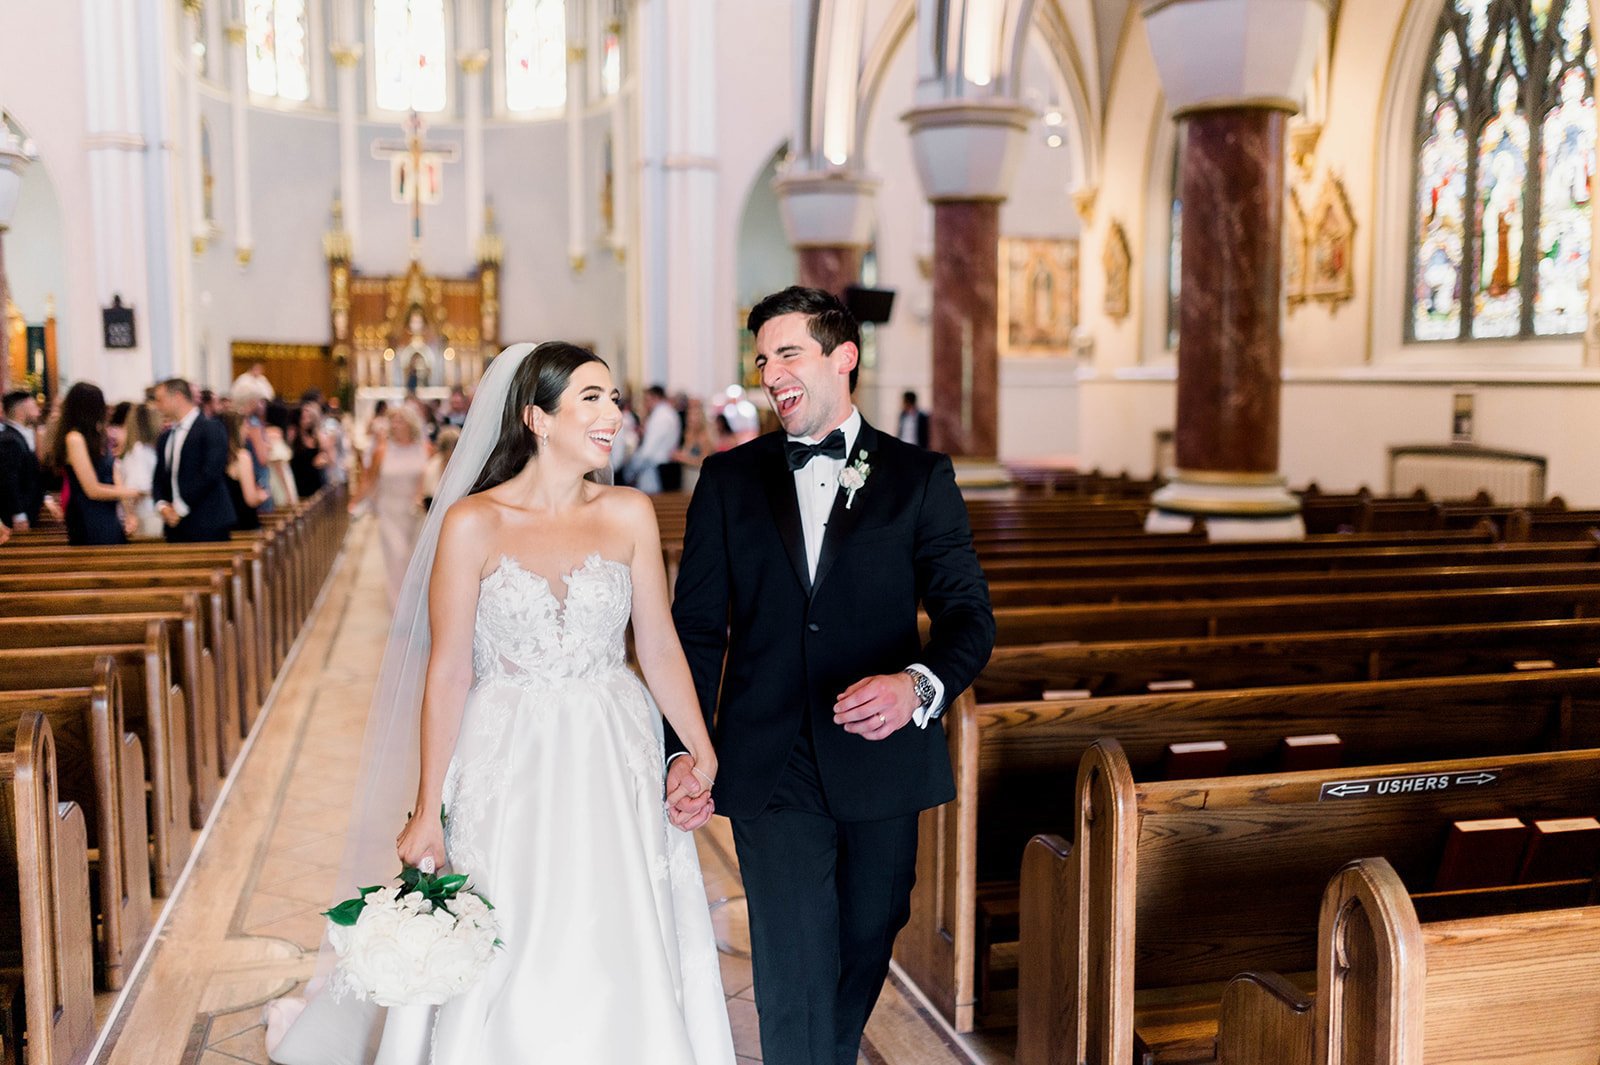 Grinning bride and groom exit church in wedding recessional. 